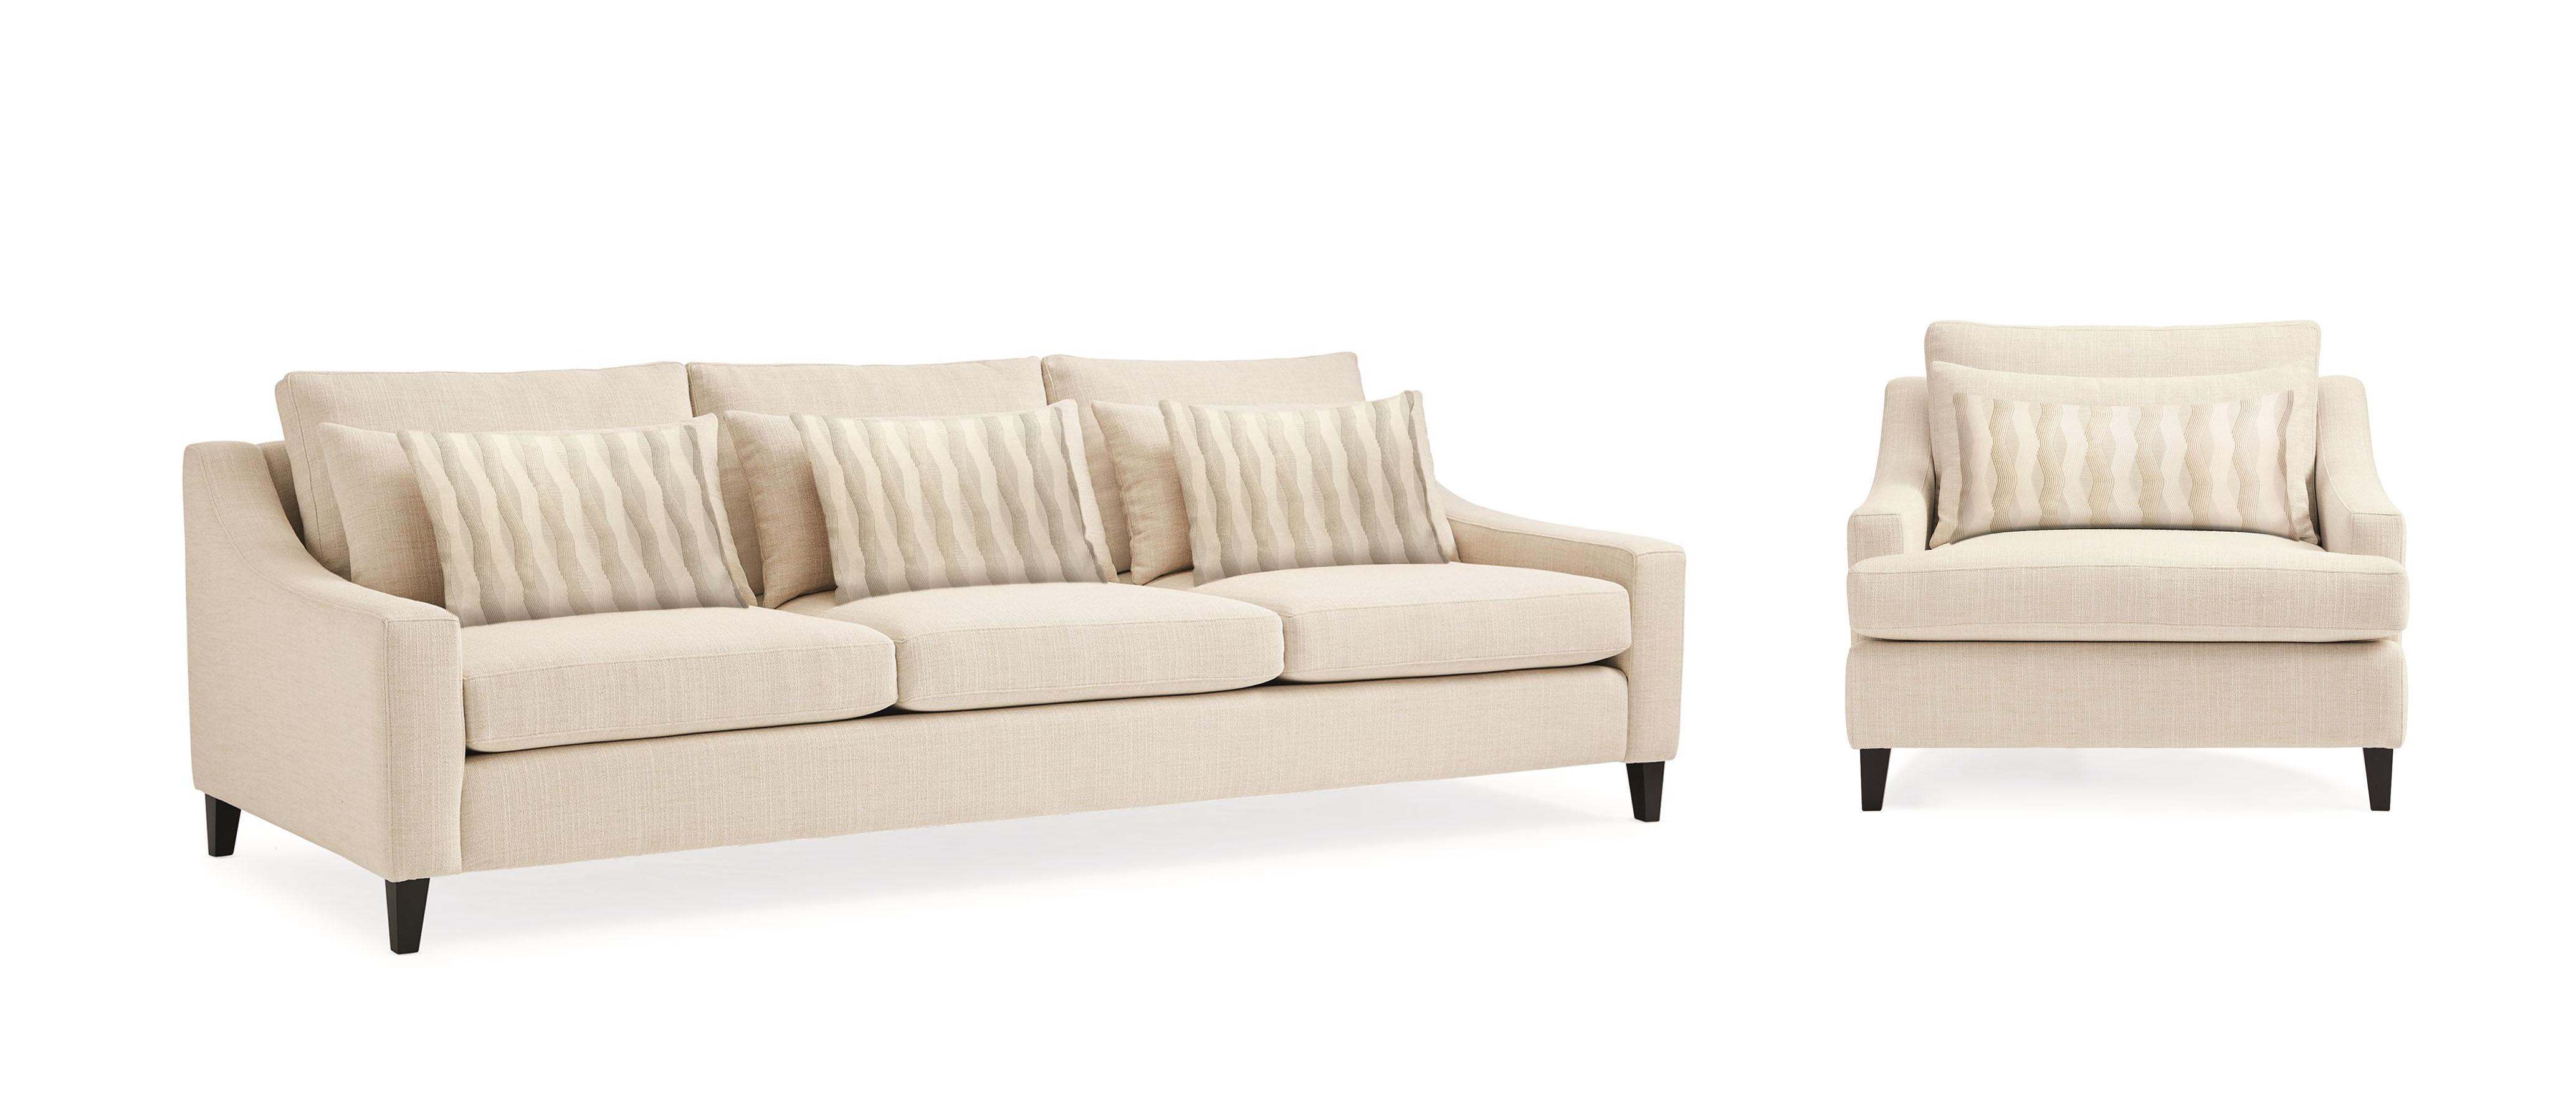 Contemporary Sofa and Chair THE MADISON SOFA (LARGE) SGU-418-013-A-Set-2 in Cream Linen